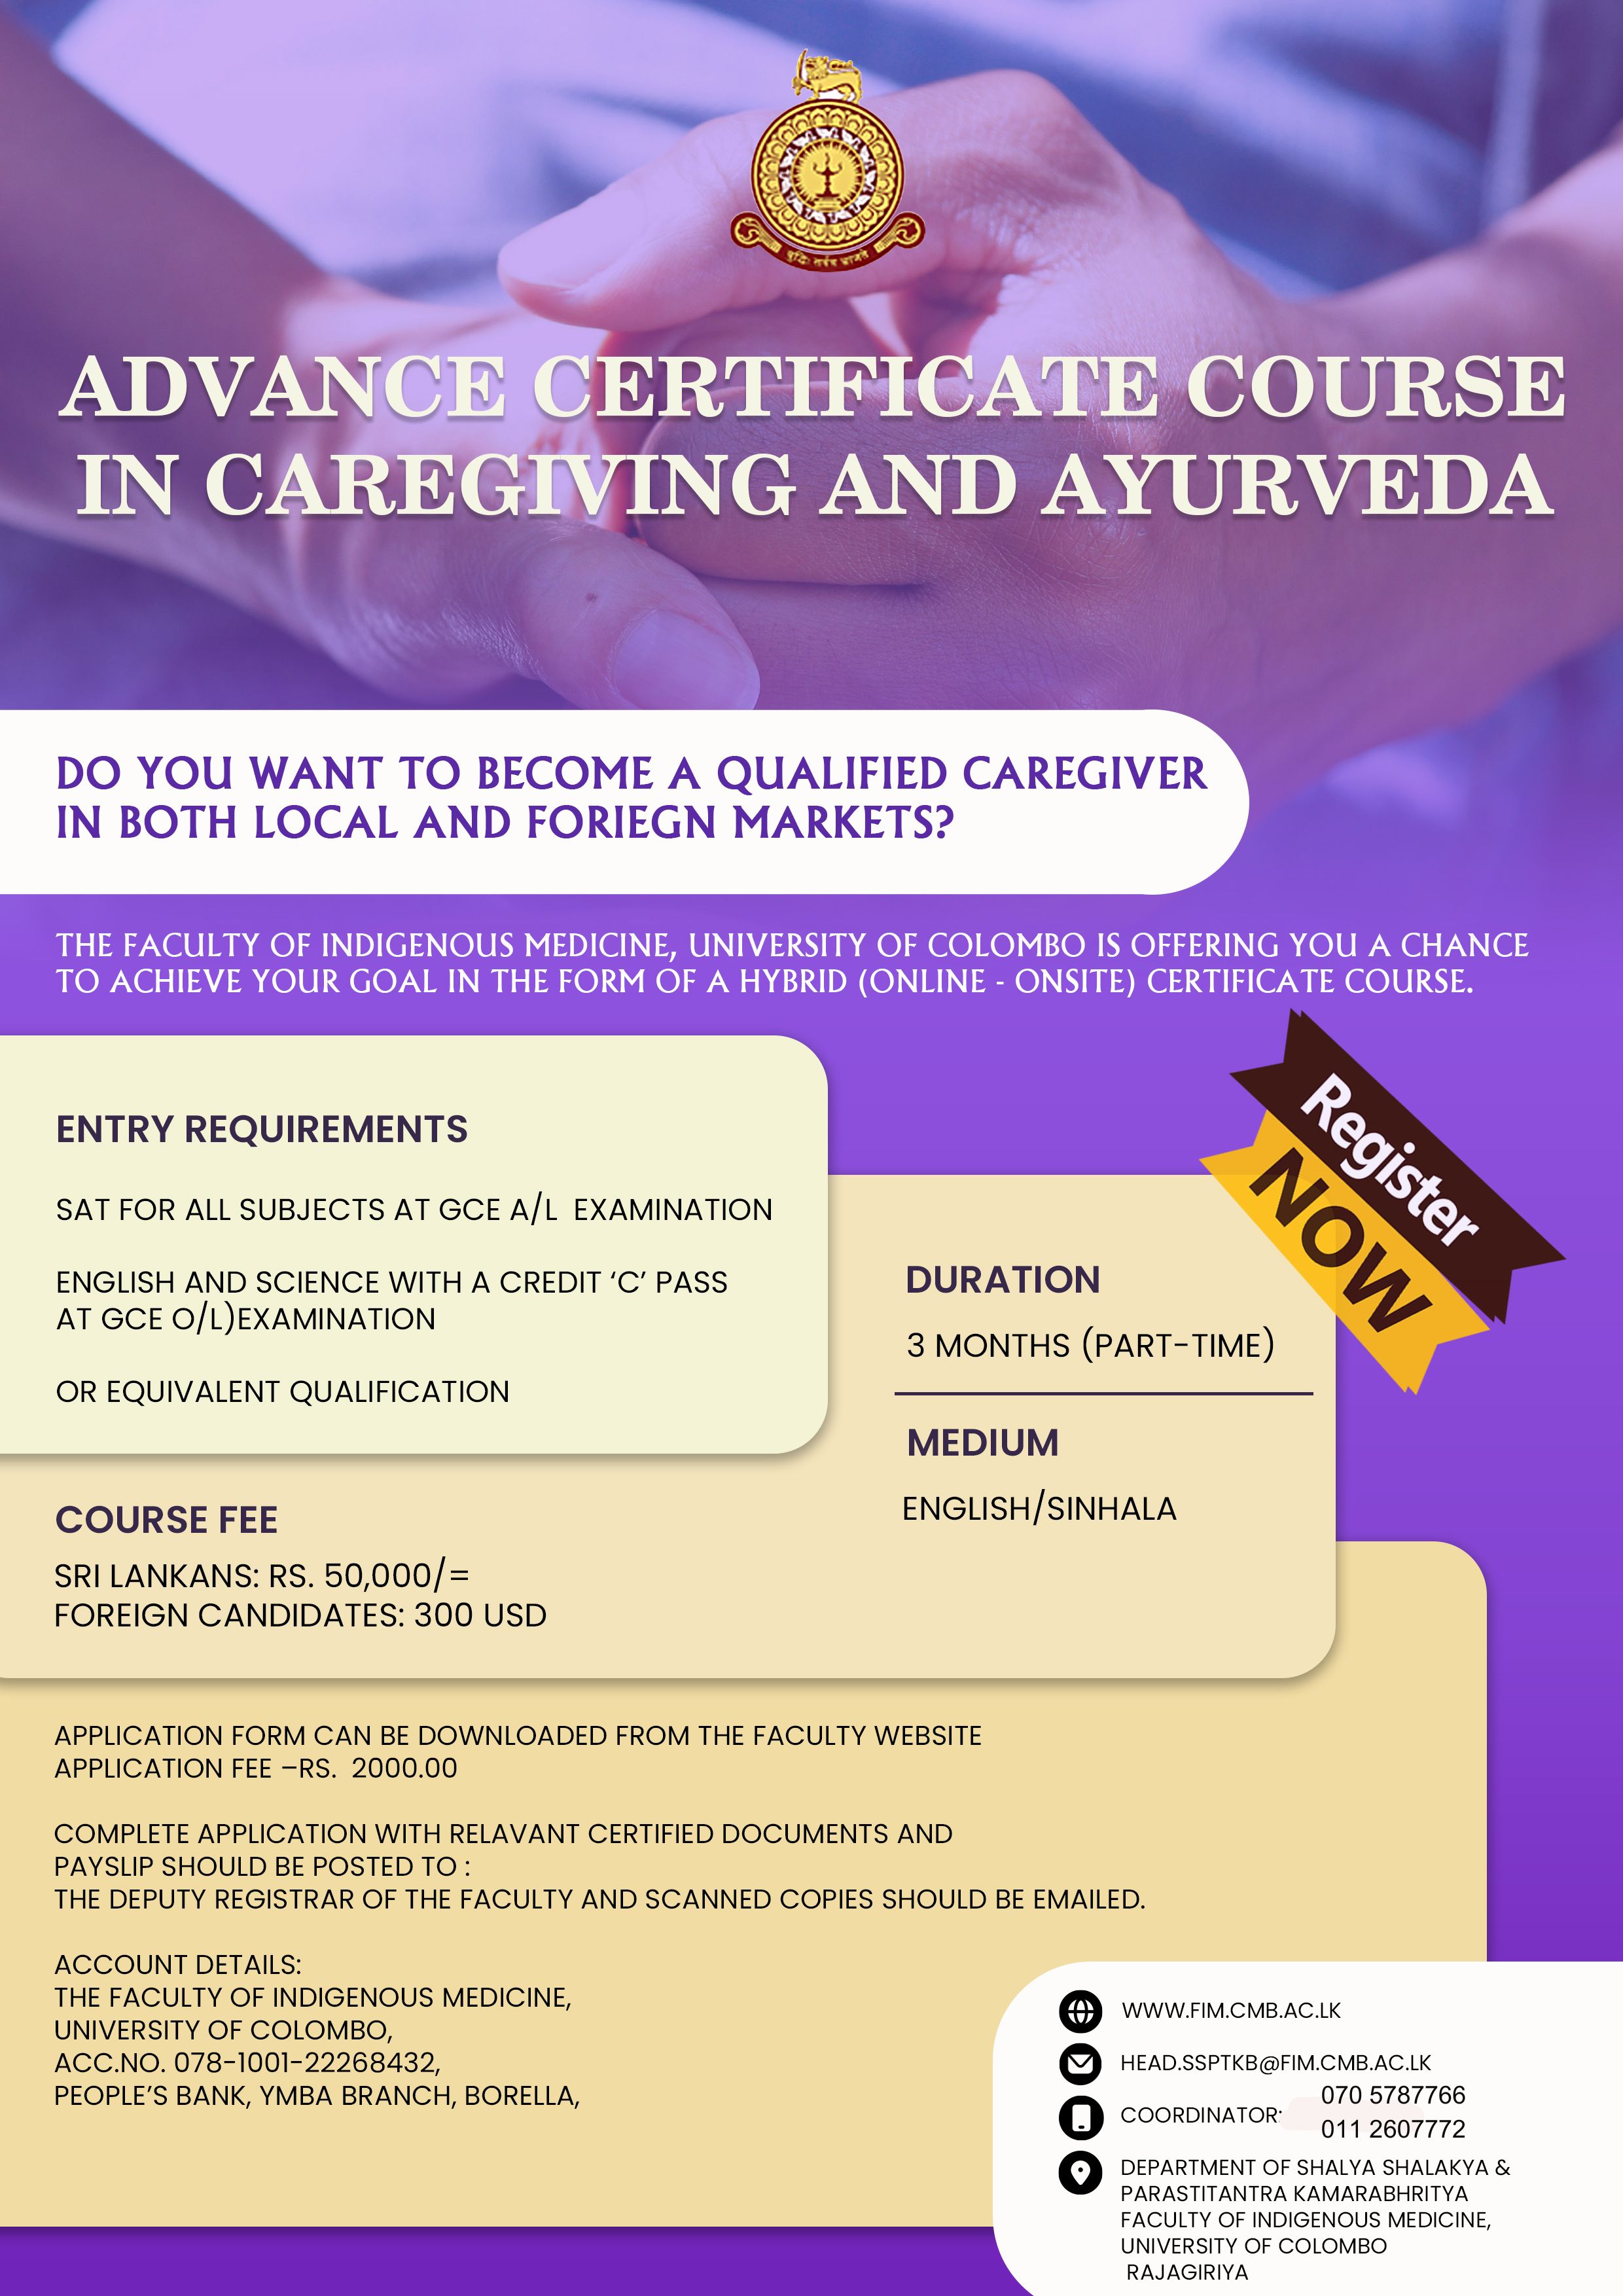 Advance Certificate Course in Caregiving and Ayurveda